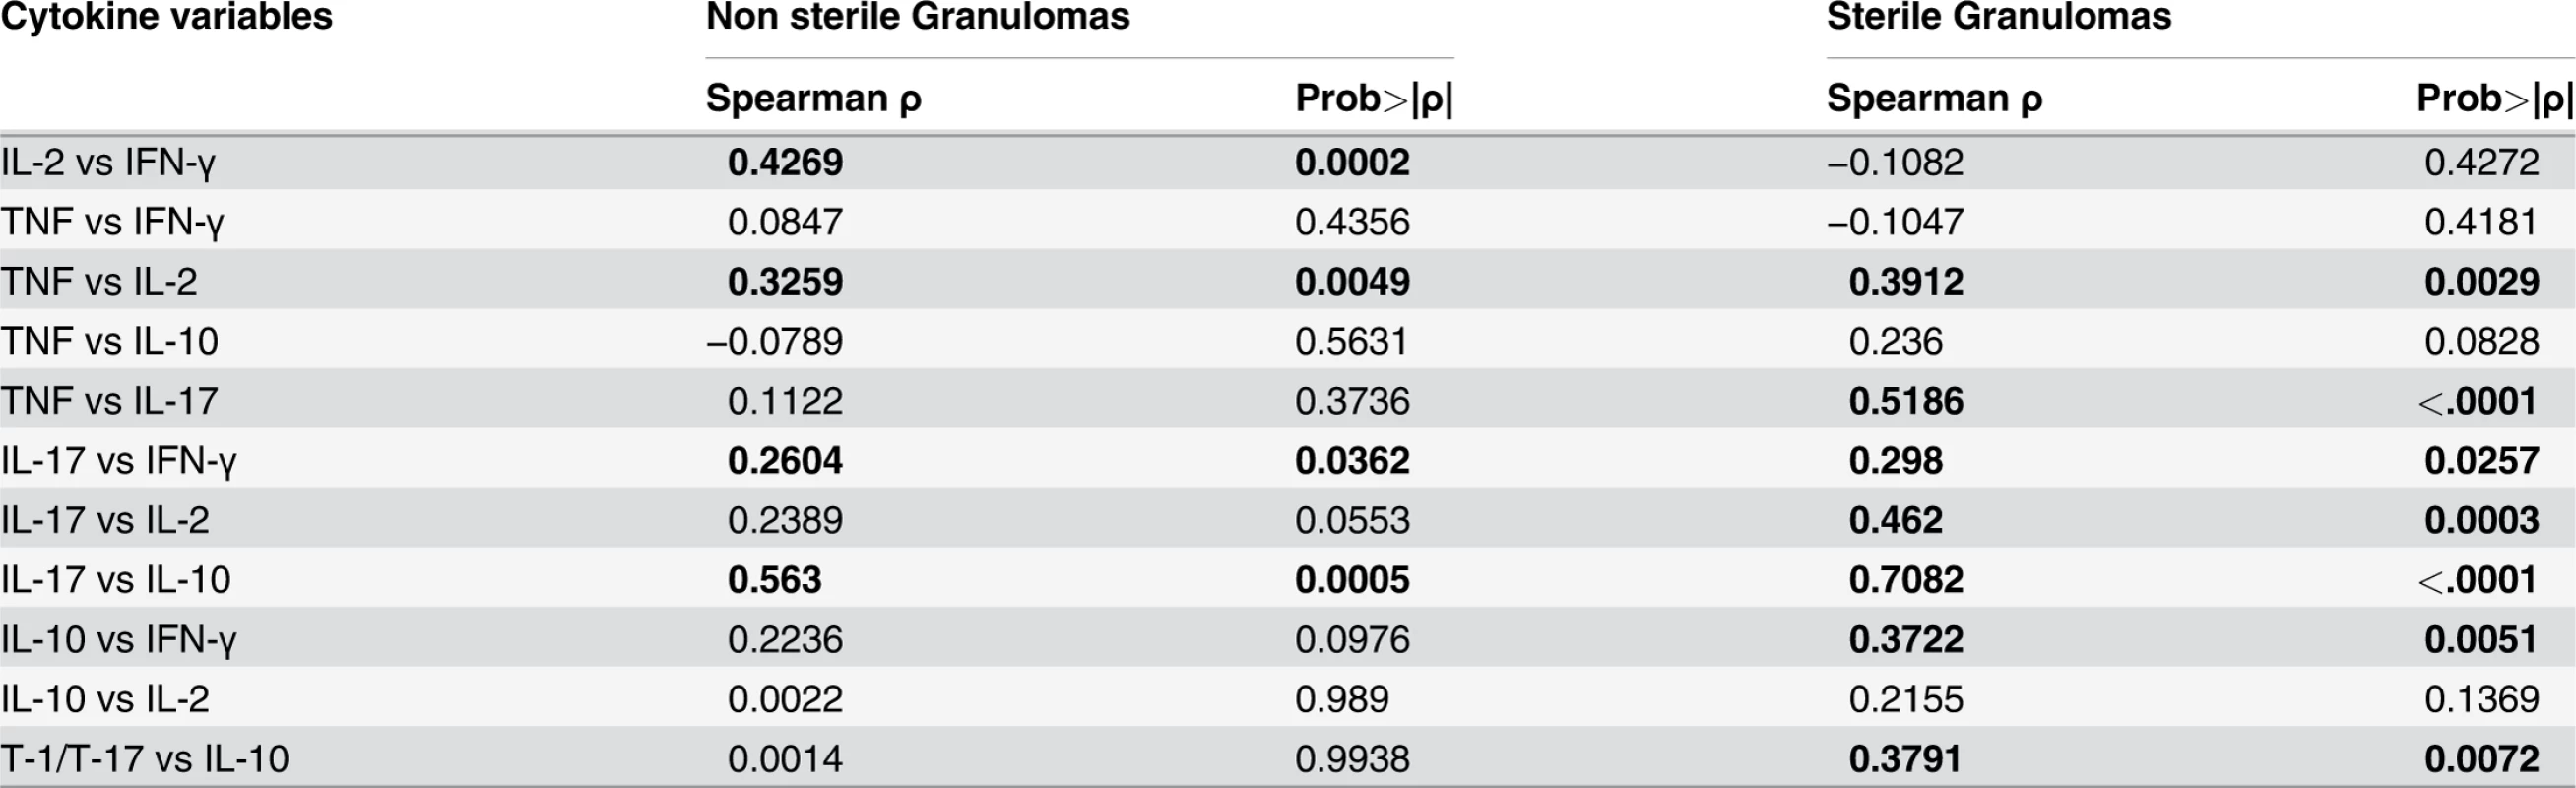 Pairwise correlation of cytokine levels within granulomas based on bacterial burden.